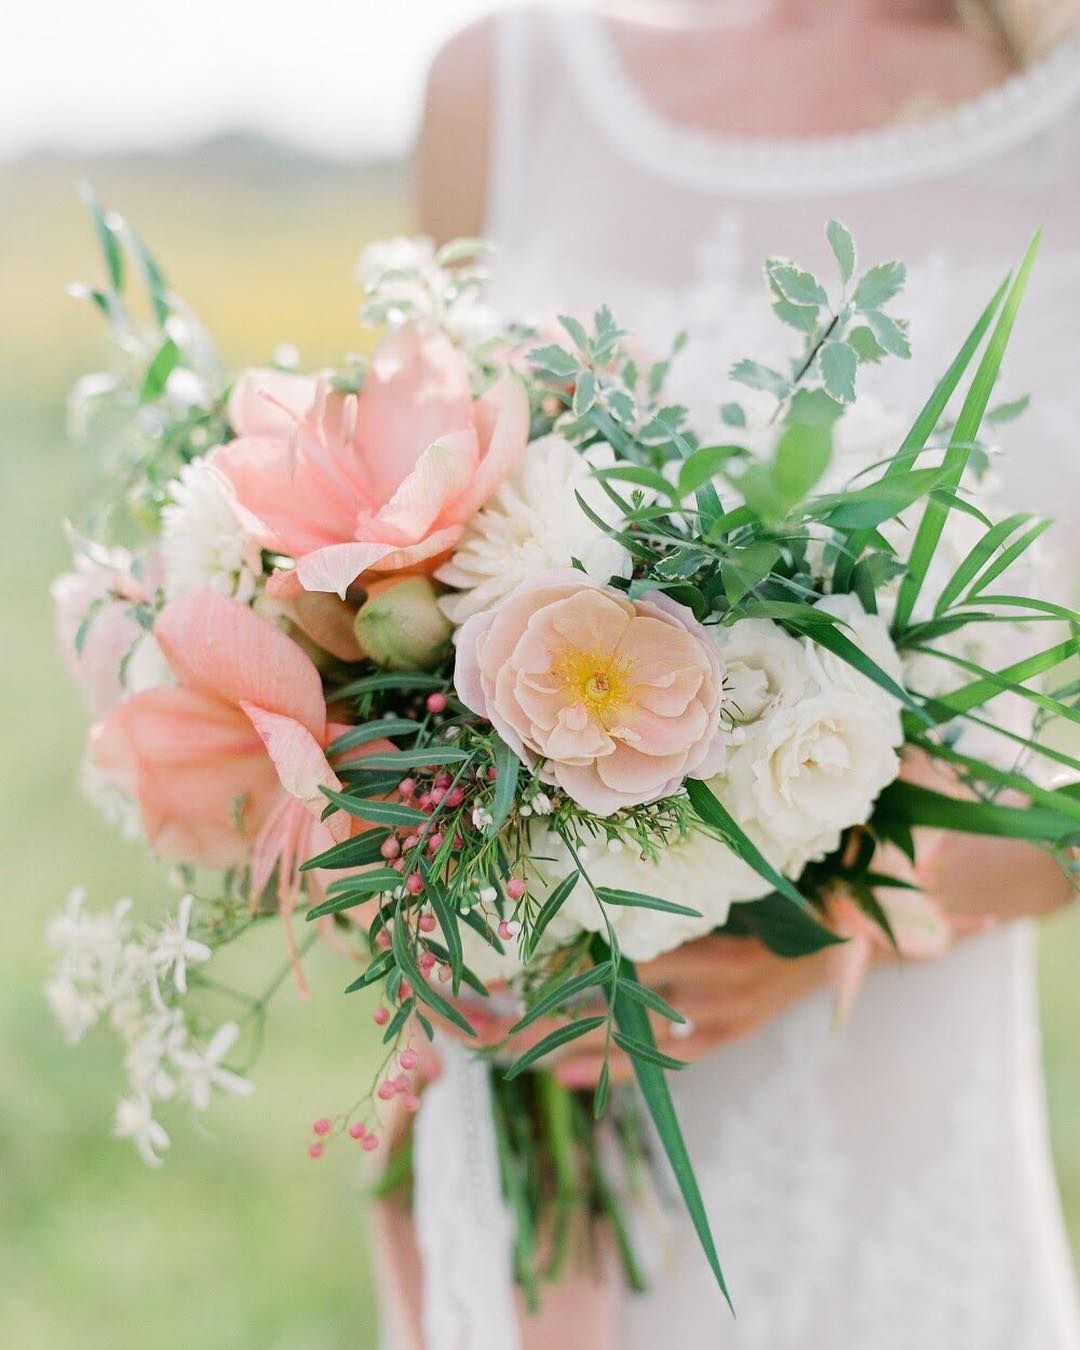 wedding bouquet ideas inspiration bouquet ideas with peonies